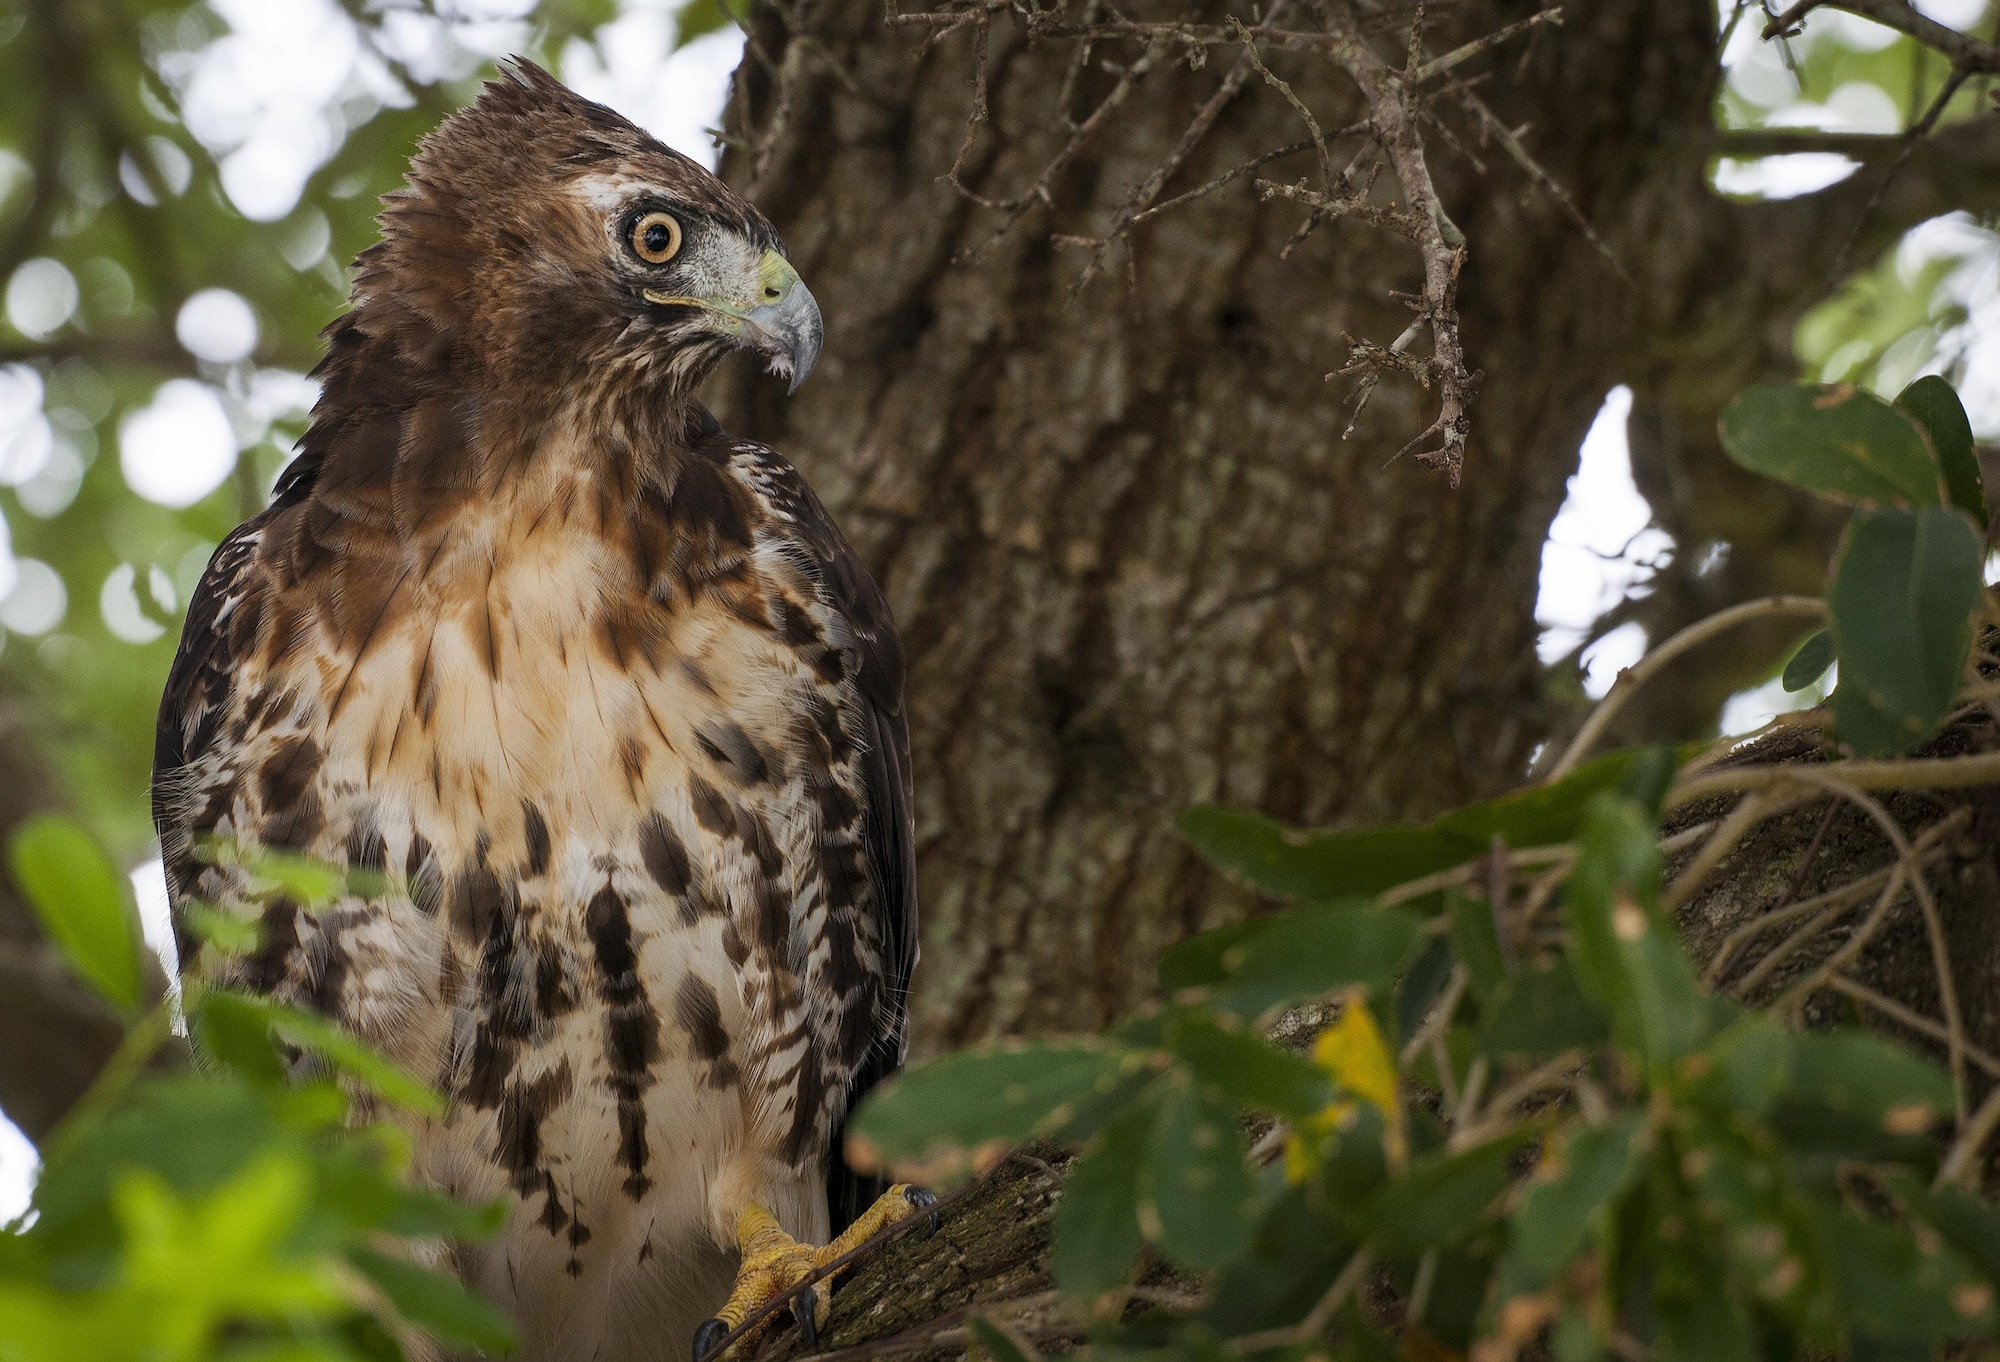 A red-tailed hawk perches on a branch of a tree July 15 at Eglin Air Force Base, Fla.  This bird of prey is just one of many unique bird species located on the base and its outlying ranges.  (U.S. Air Force photo/Samuel King Jr.)